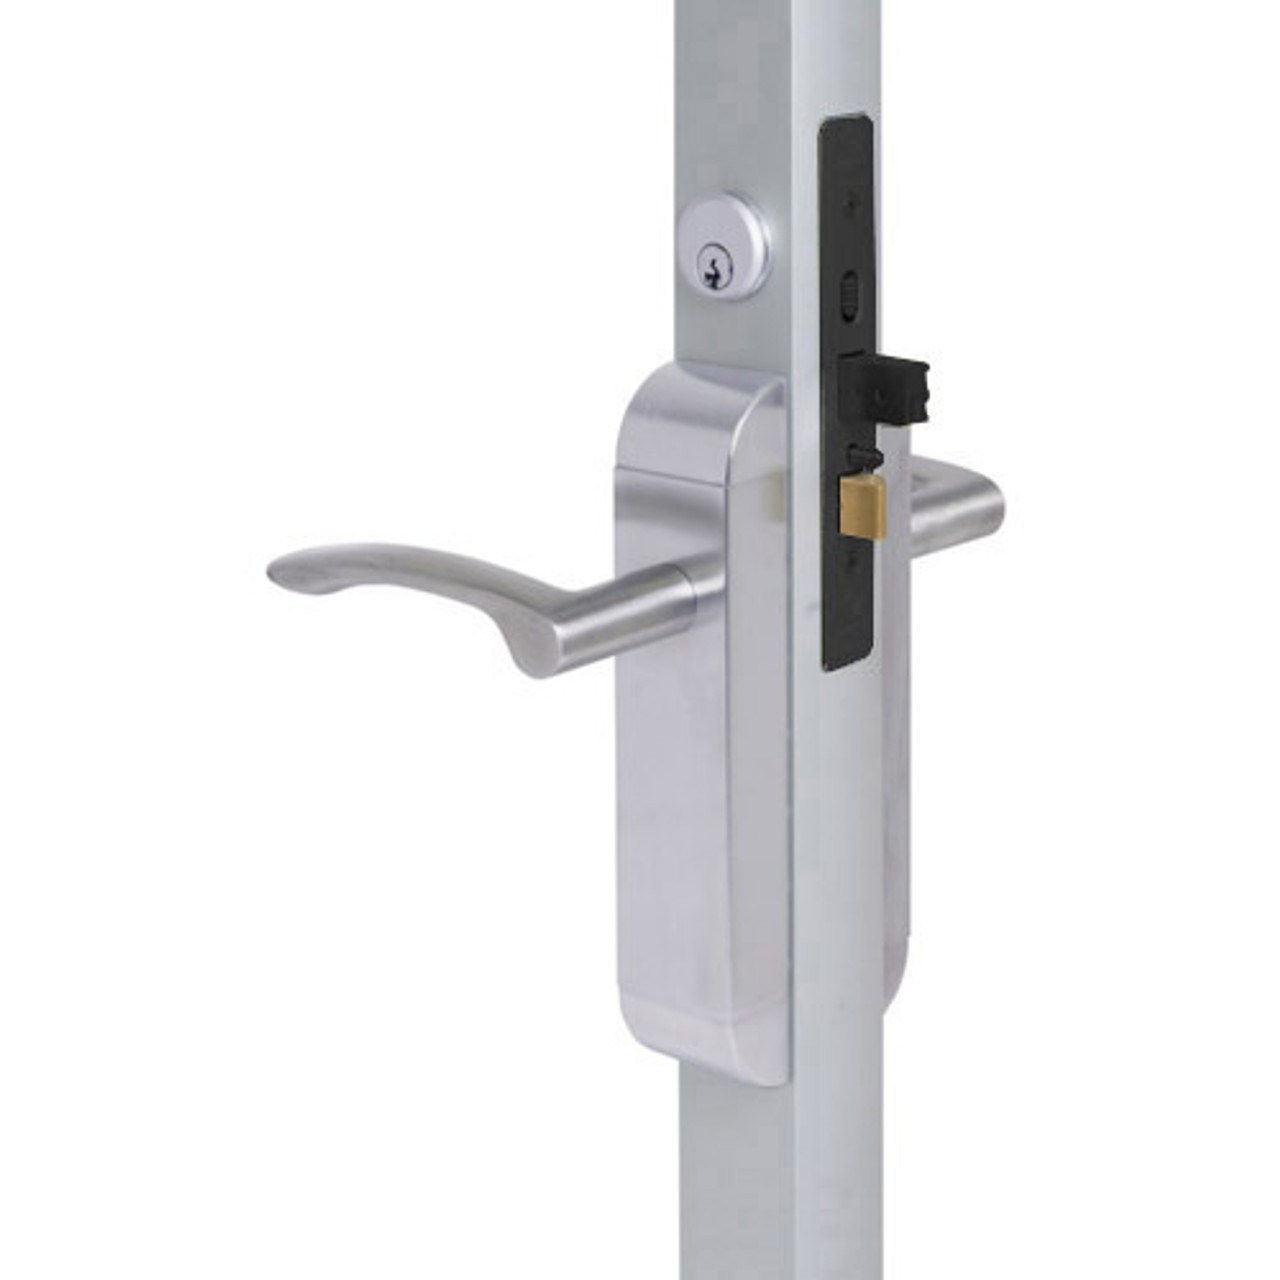 2190-413-301-32 Adams Rite Dual Force Interconnected 2190 series Deadlock/Deadlatch in Bright Stainless